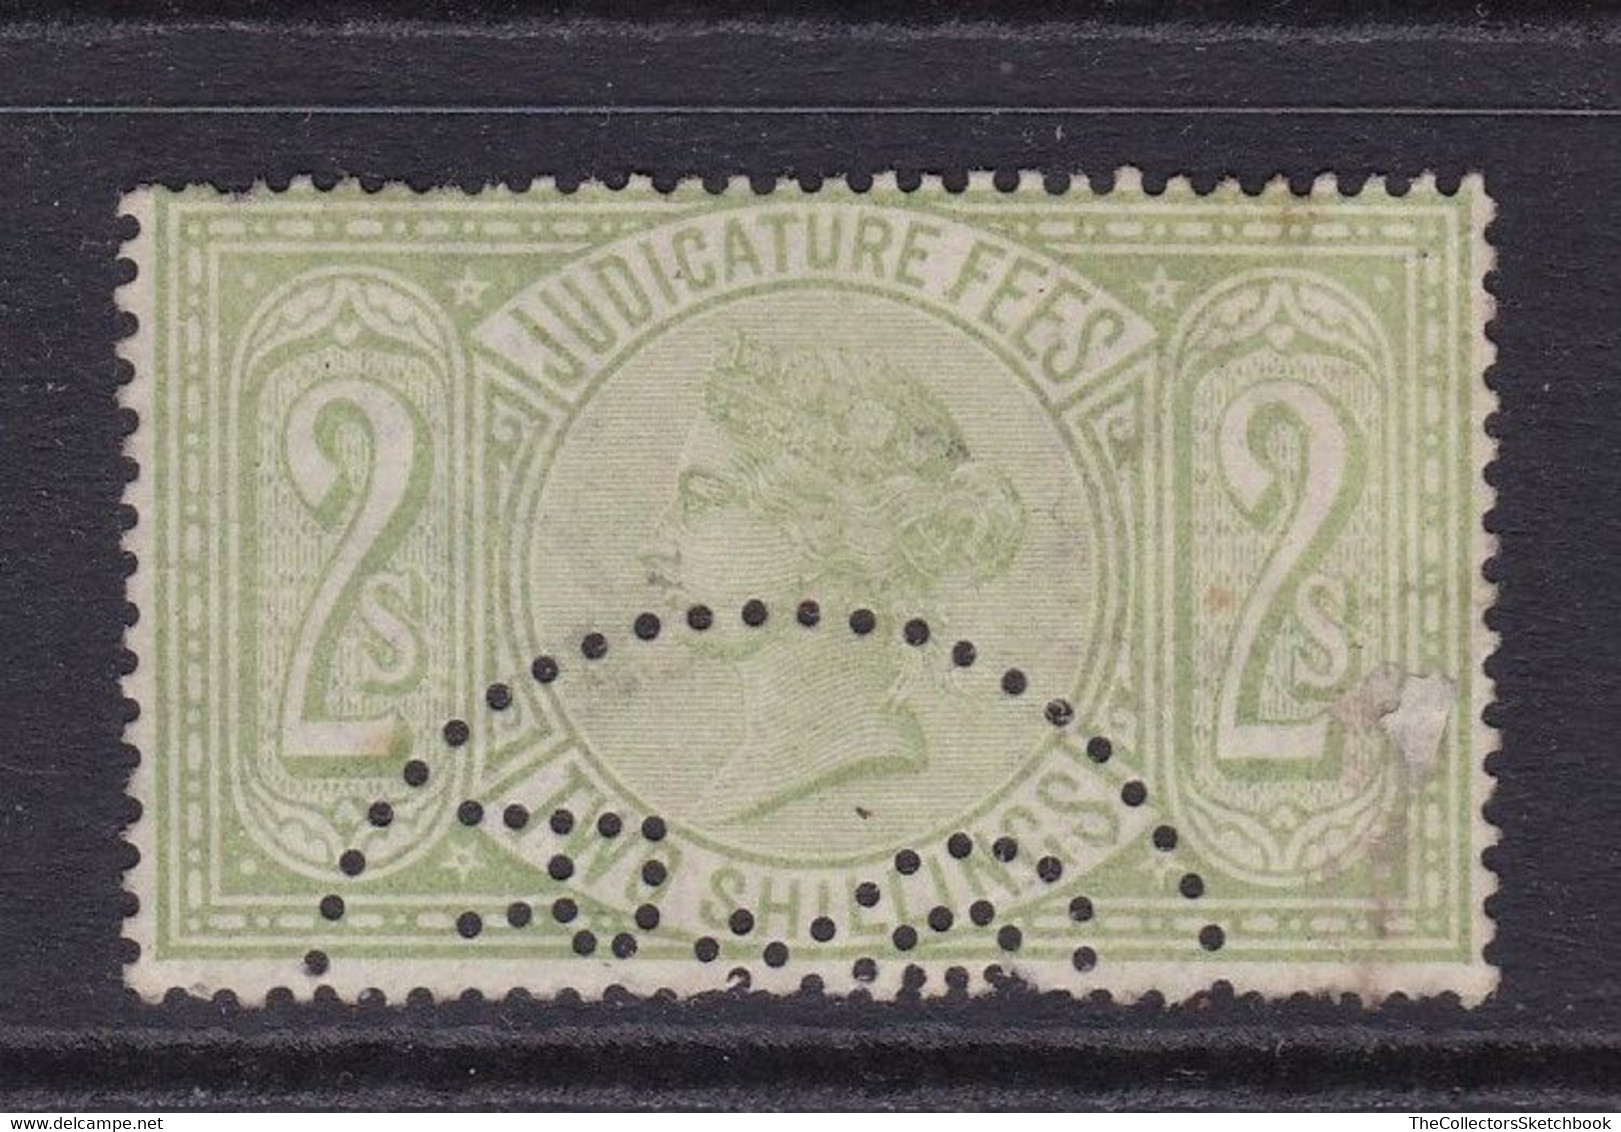 GB Fiscal/ Revenue Stamp.  Judicature Fees 2/- Green Fine Used. Barefoot 35 - Fiscali